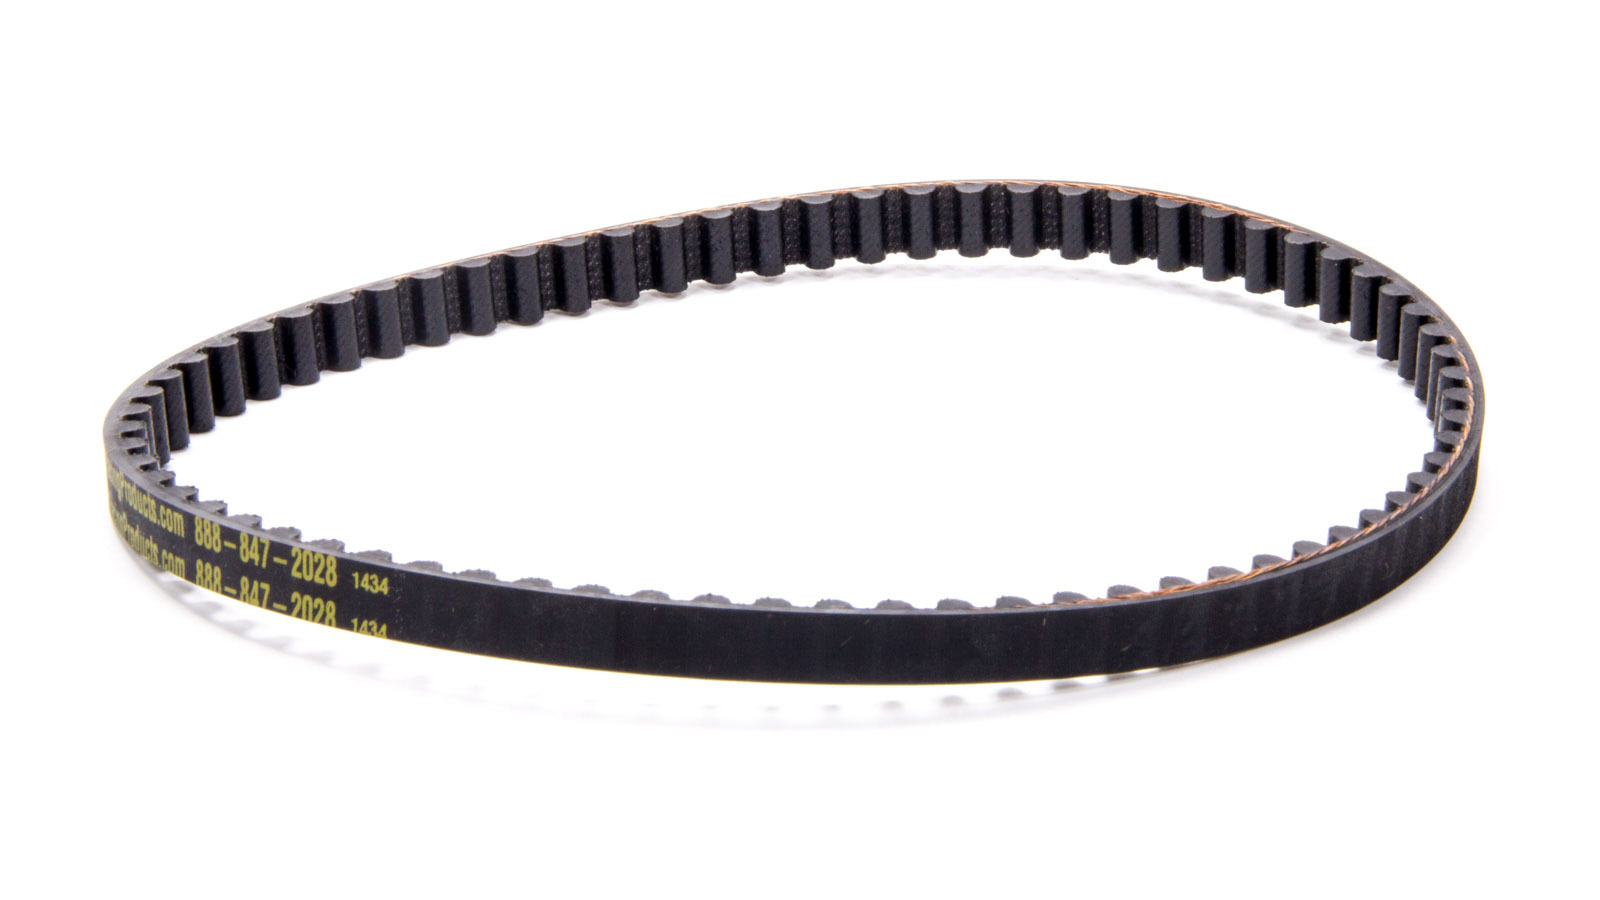 Jones Racing Products 720-10HD HTD Drive Belt, 28.350 in Long, 10 mm Wide, 8 mm Pitch, Each